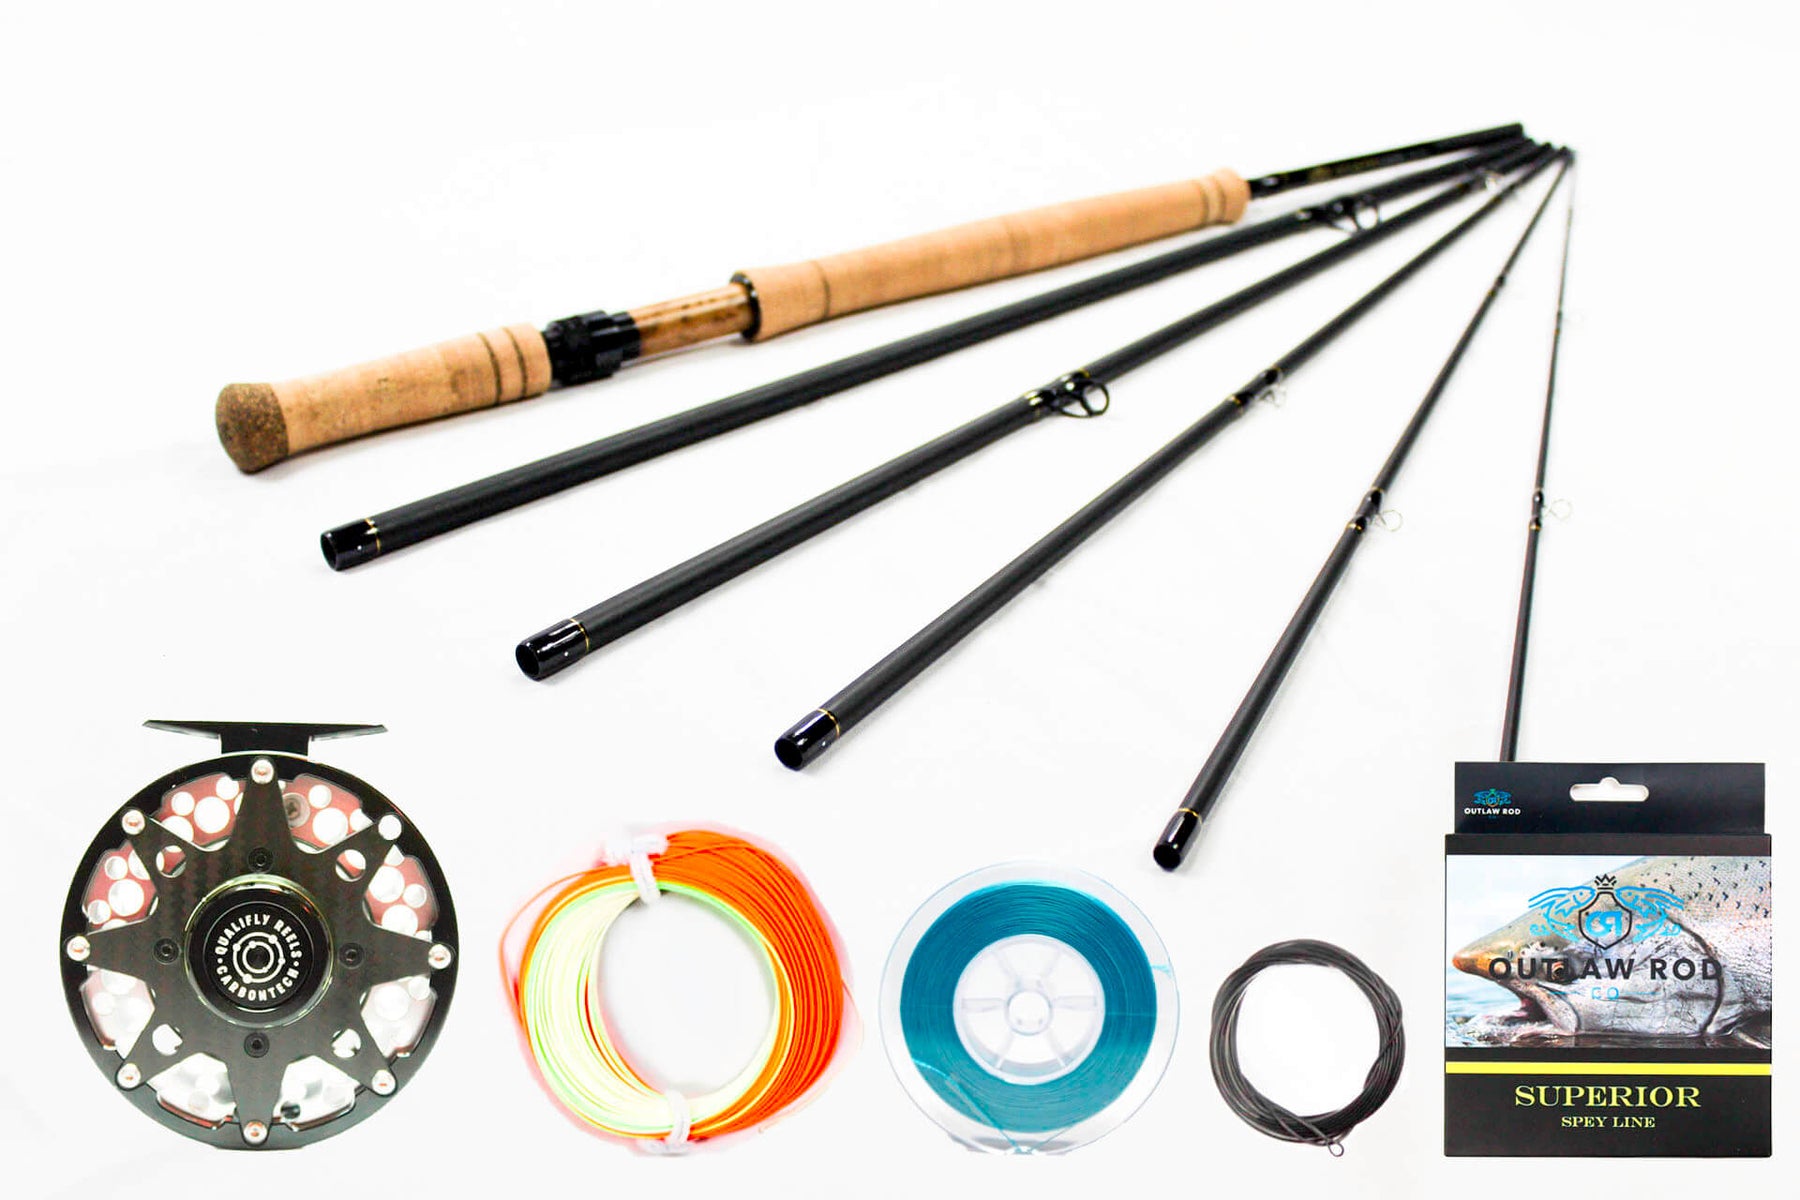 8wt 13ft 6in M-Series (Spey Rod) and Oversized 11-12wt Qualifly